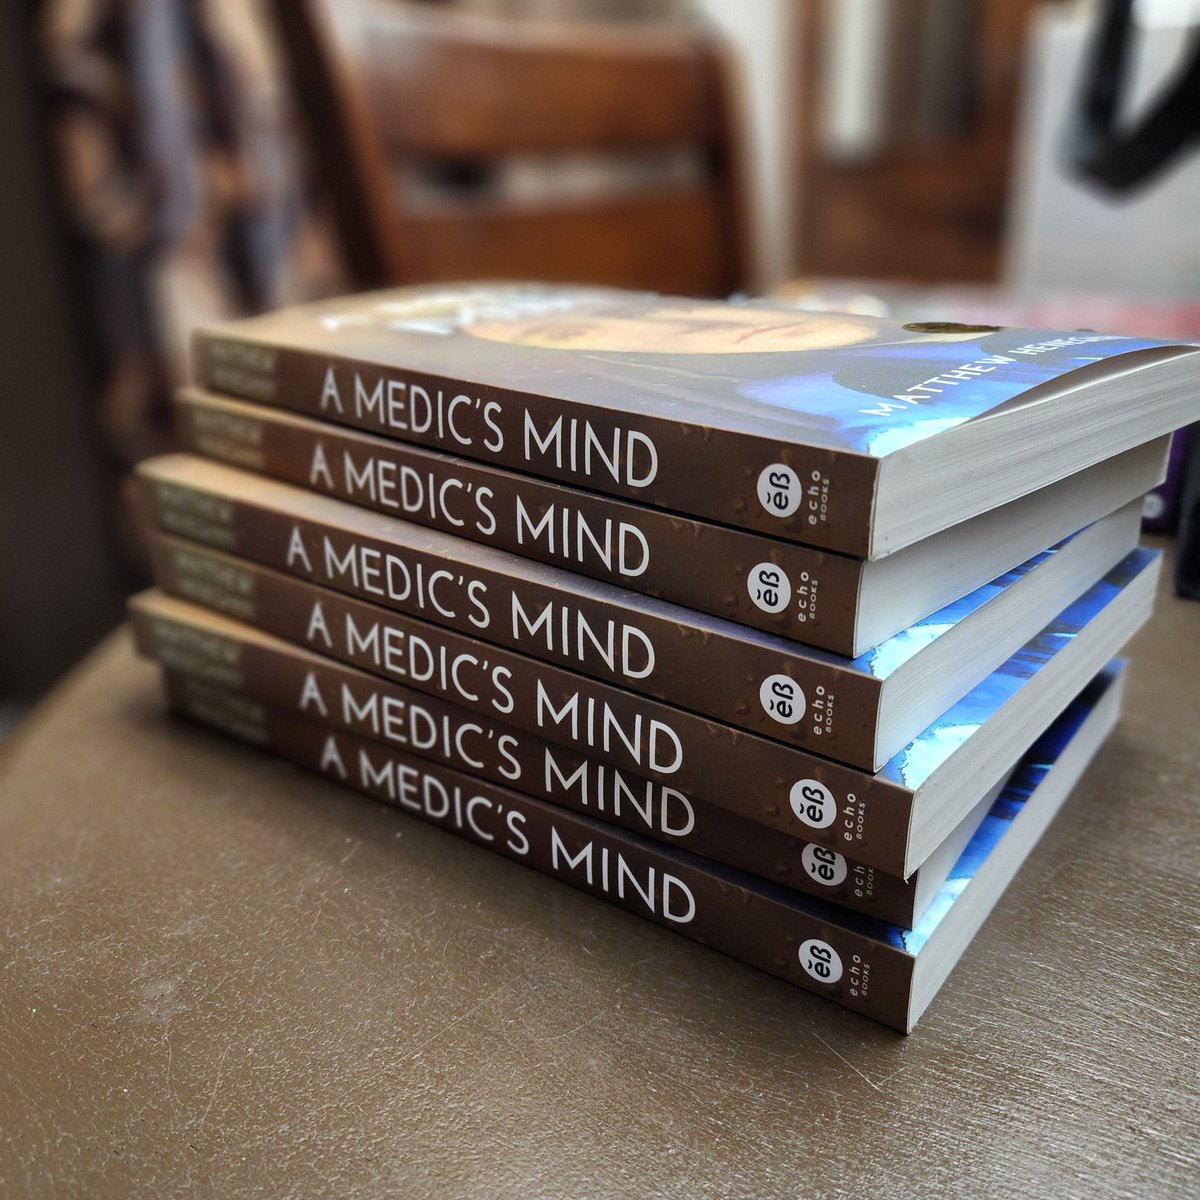 Signed copies of my book, #amedicsmind bound for England! This life is a blessing.
..
Where's the furthest you've mailed one of your books?
..
#Bookstagram #authorquotes #canadianliterature #canadianauthor #publishedauthor #writingcommunity